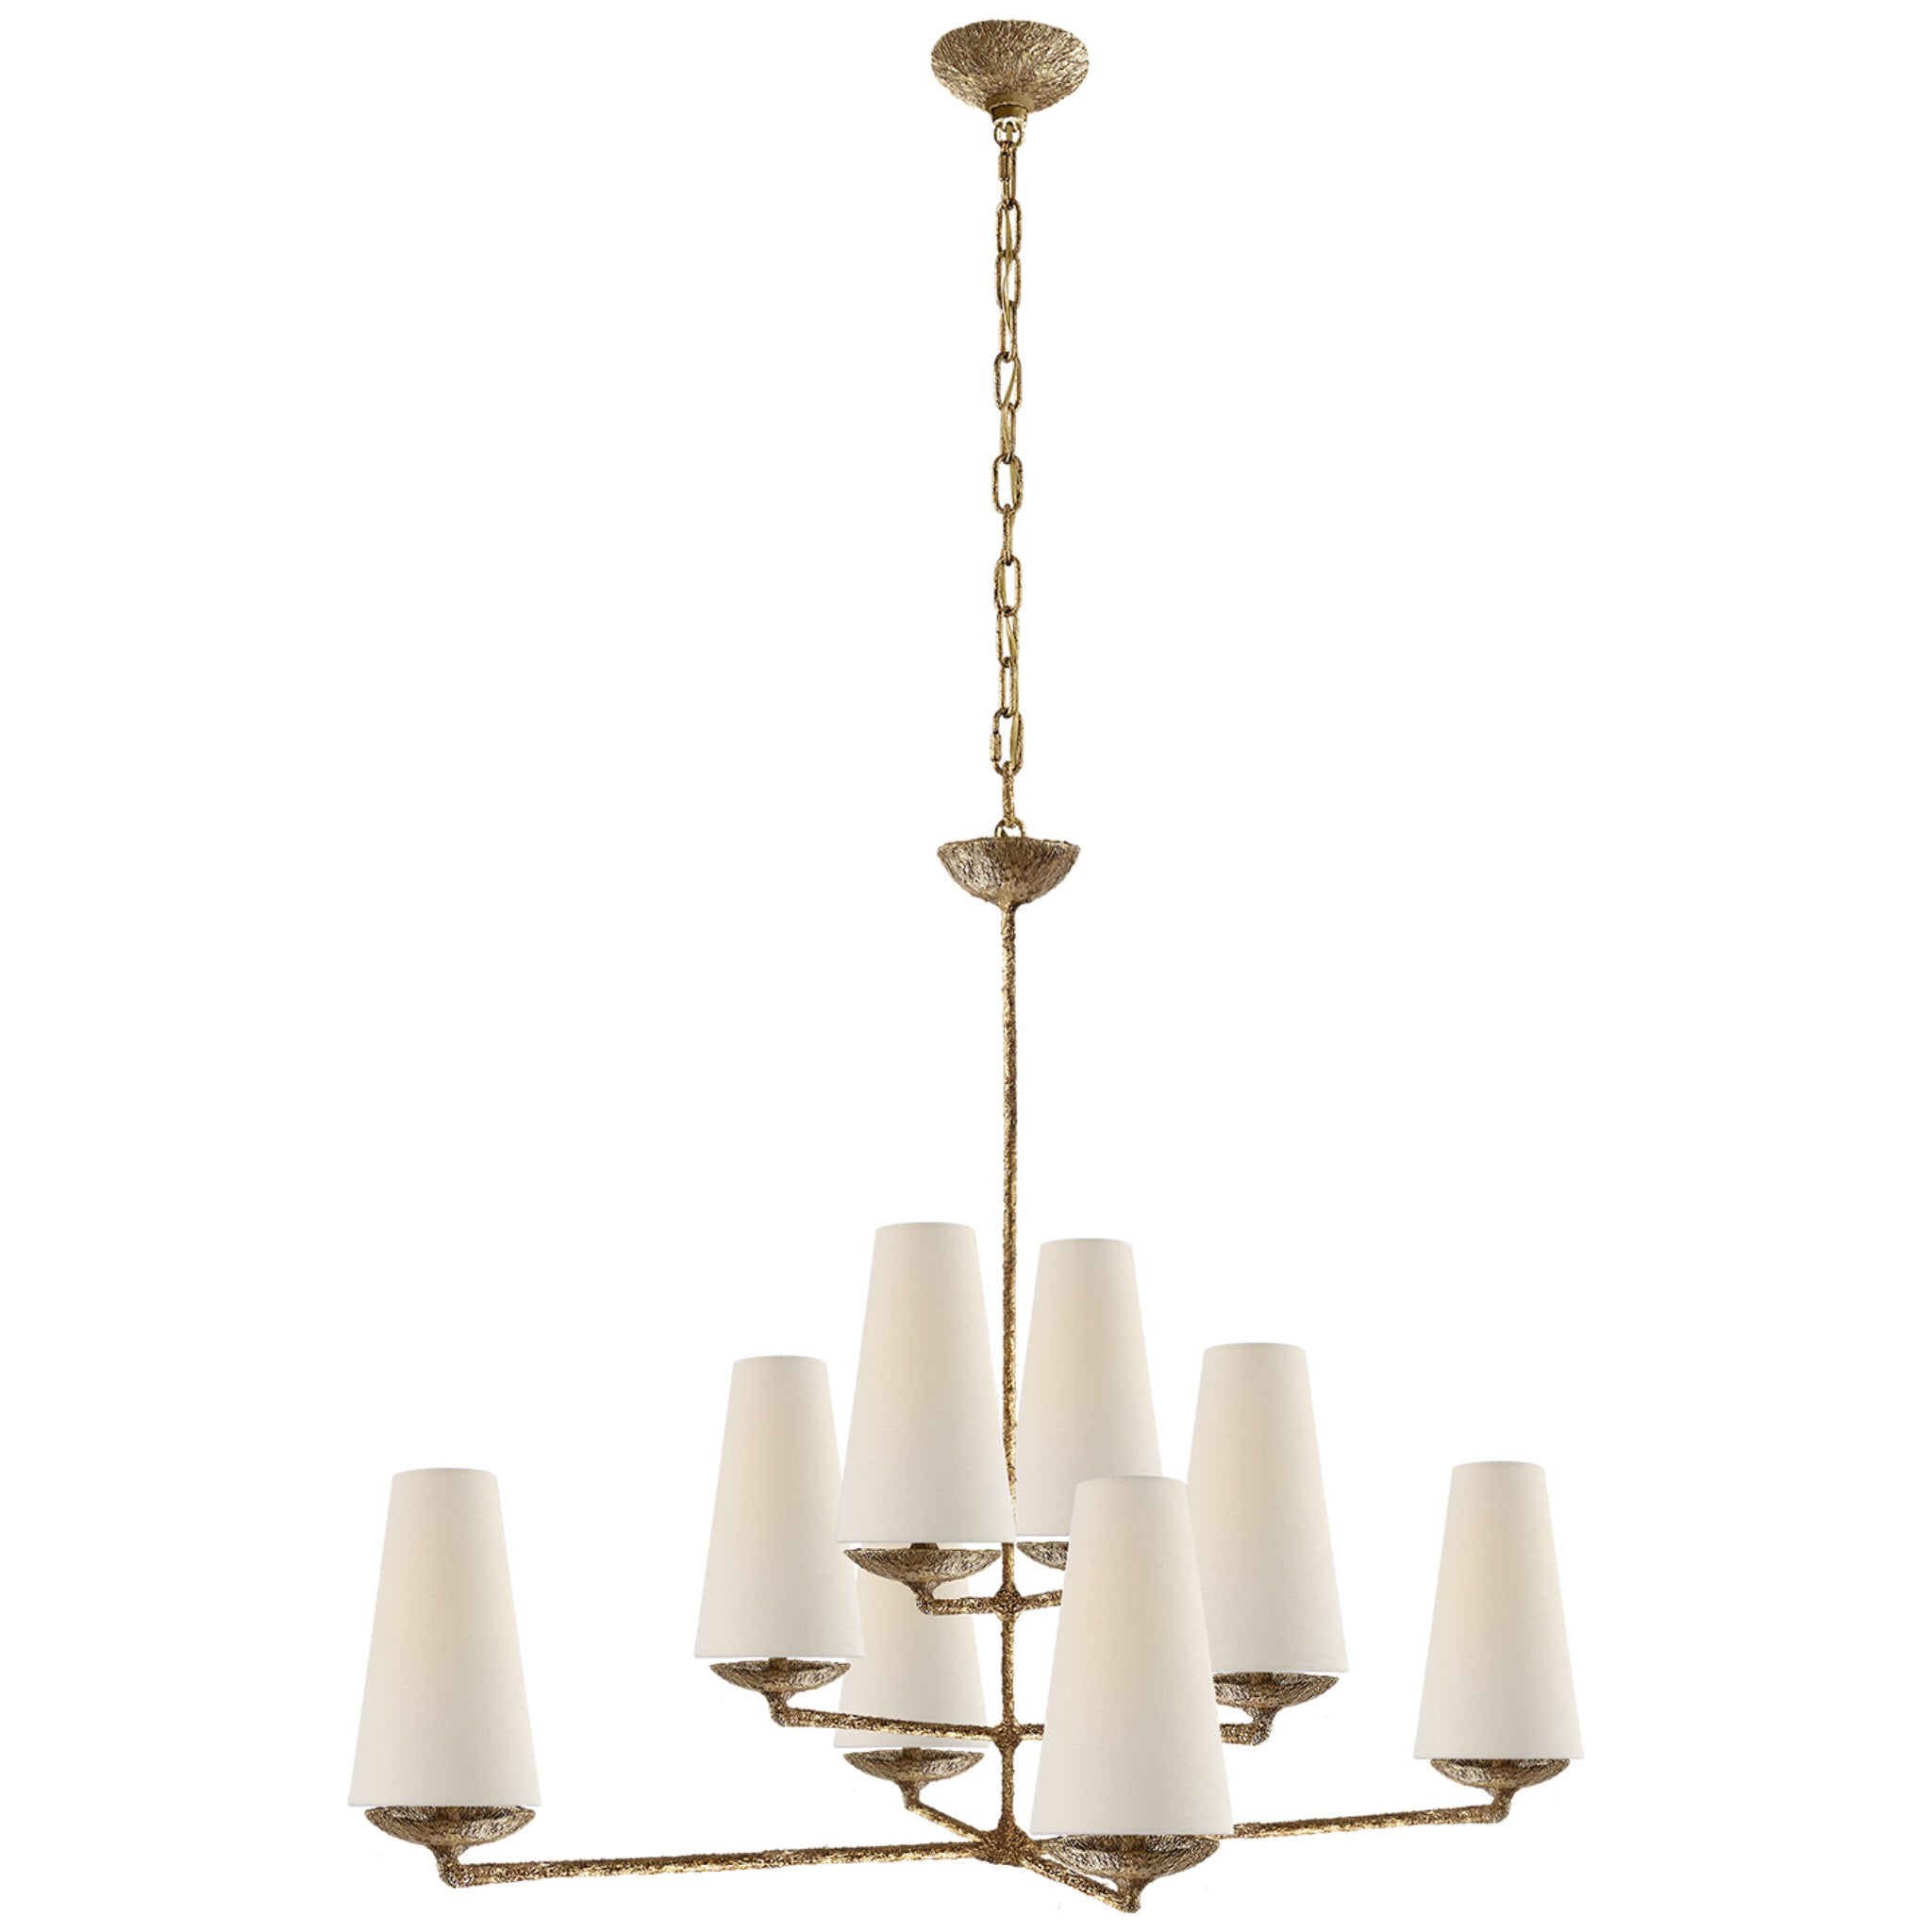 AERIN Fontaine Large Offset Chandelier in Gilded Plaster with Linen Shades